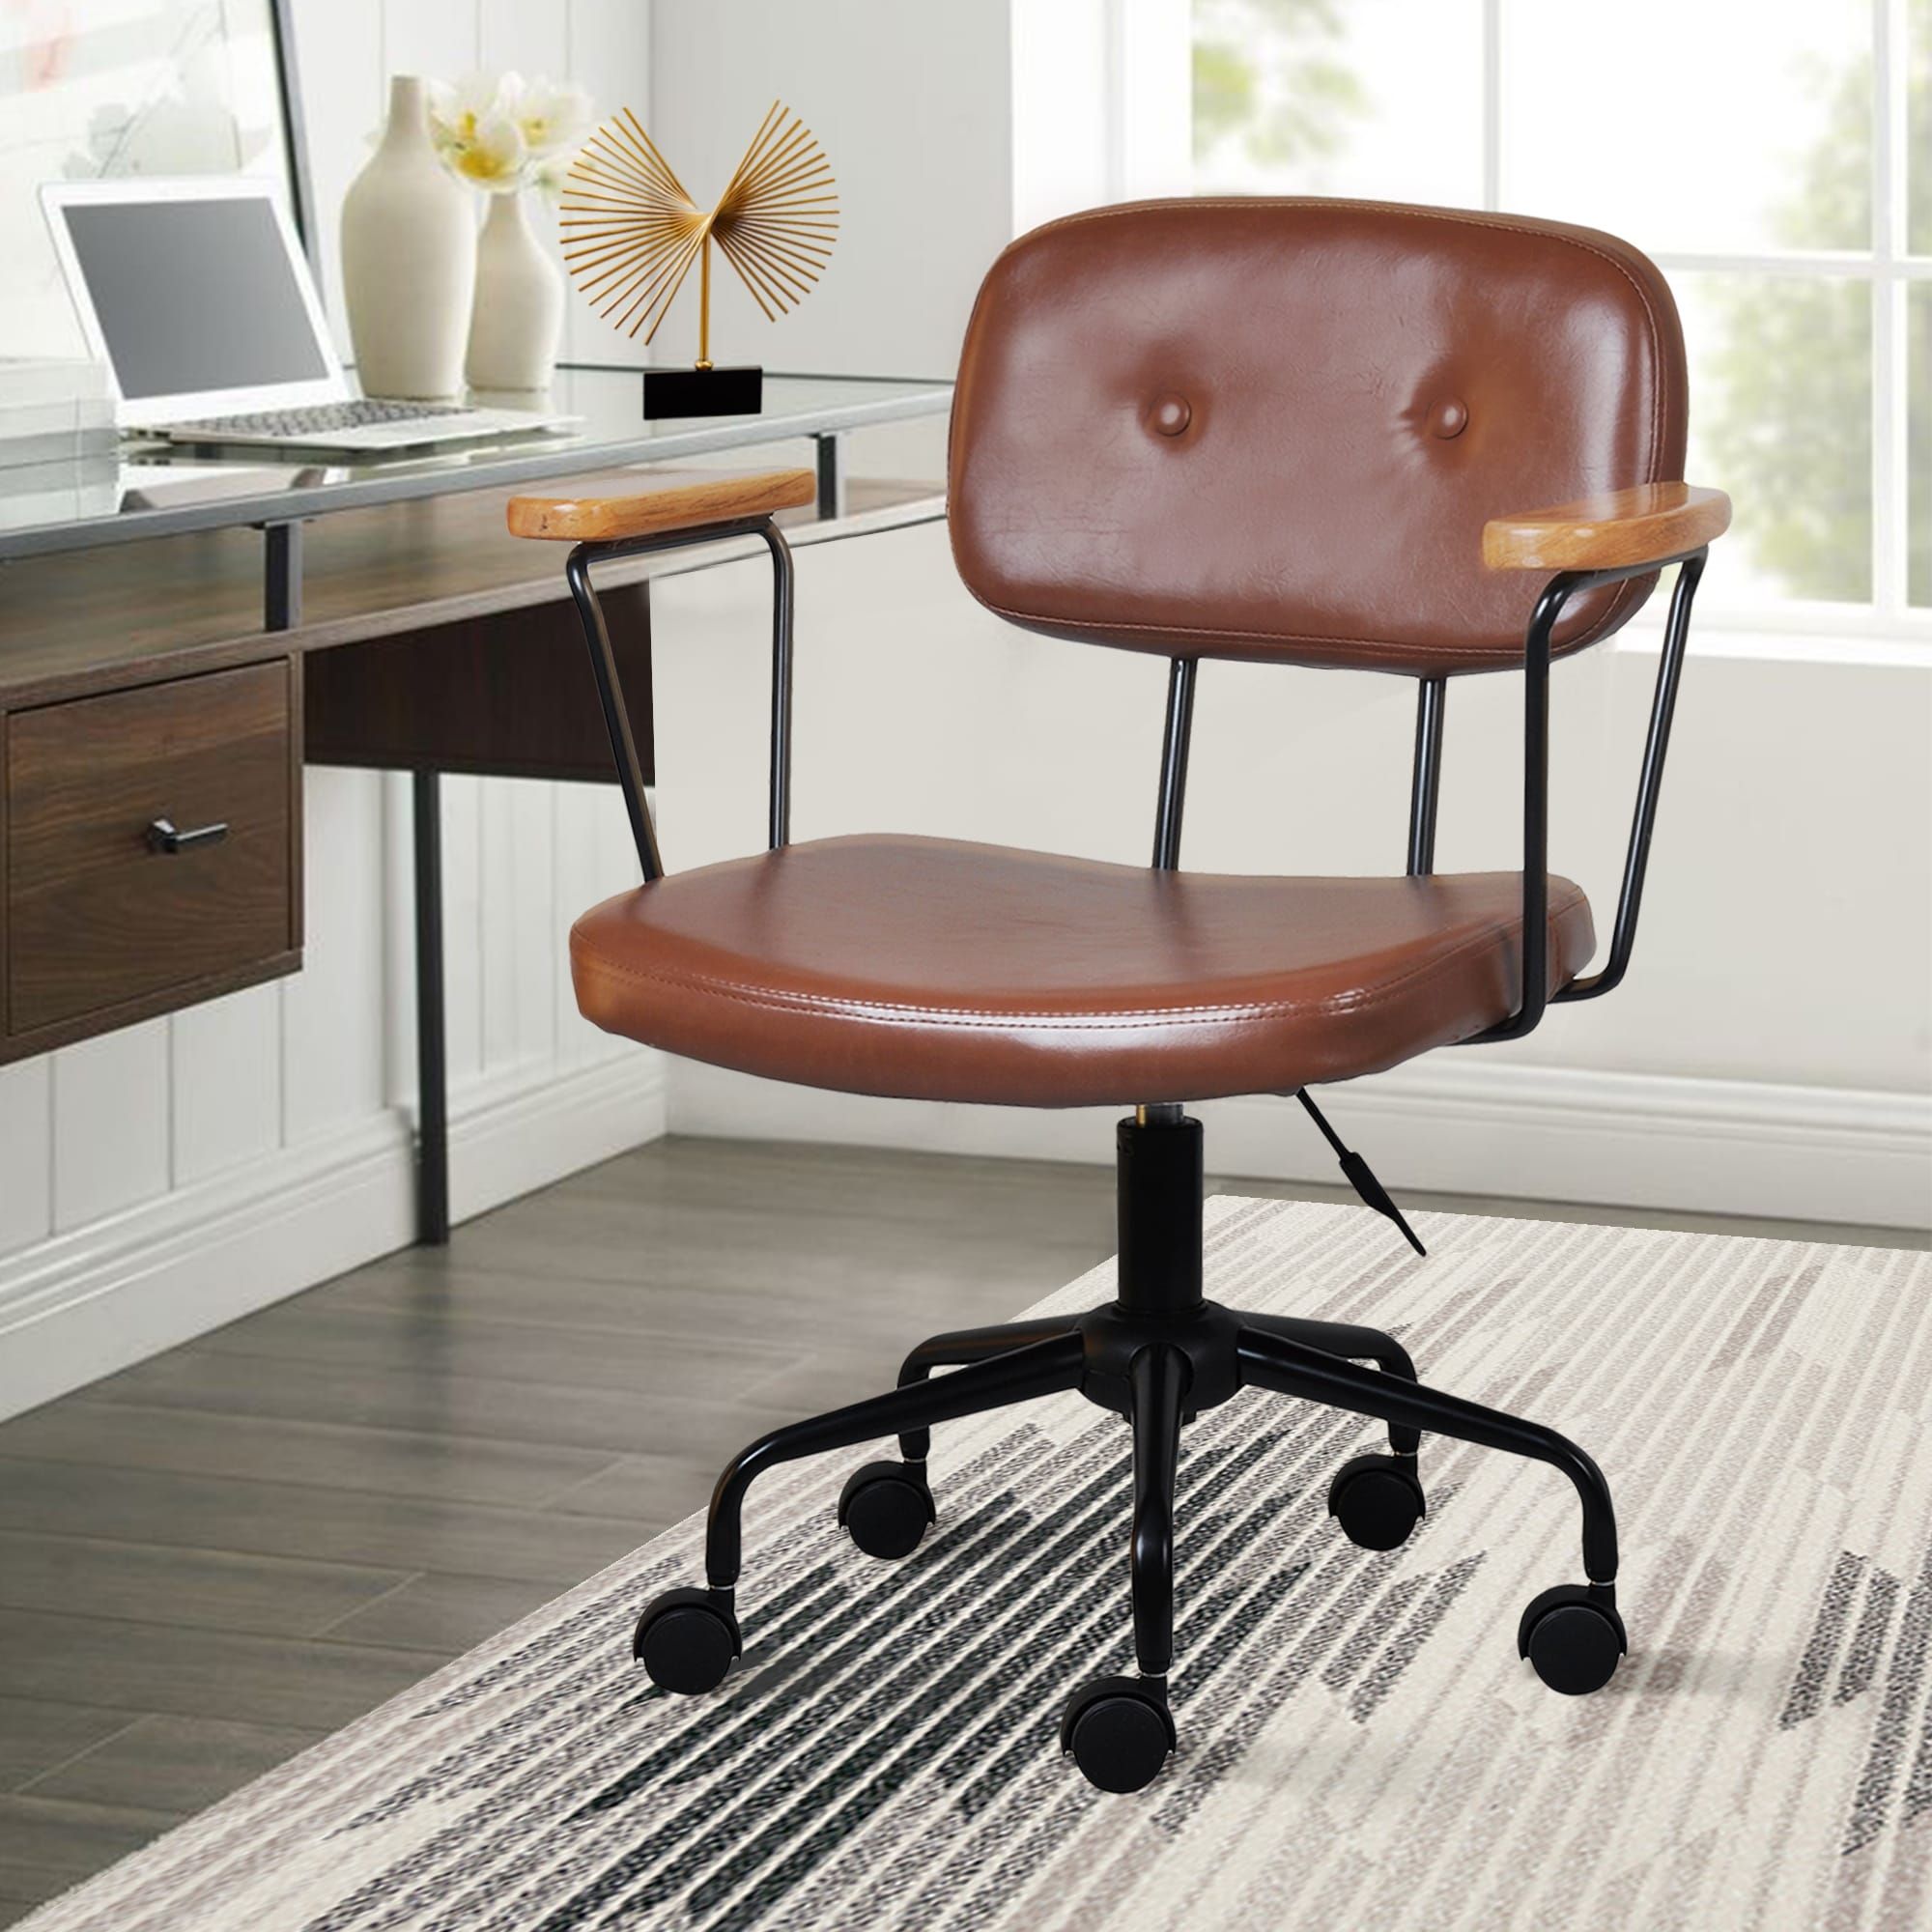 The Benefits of Using an Ergonomic Leather Office Chair for Enhanced Comfort and Support